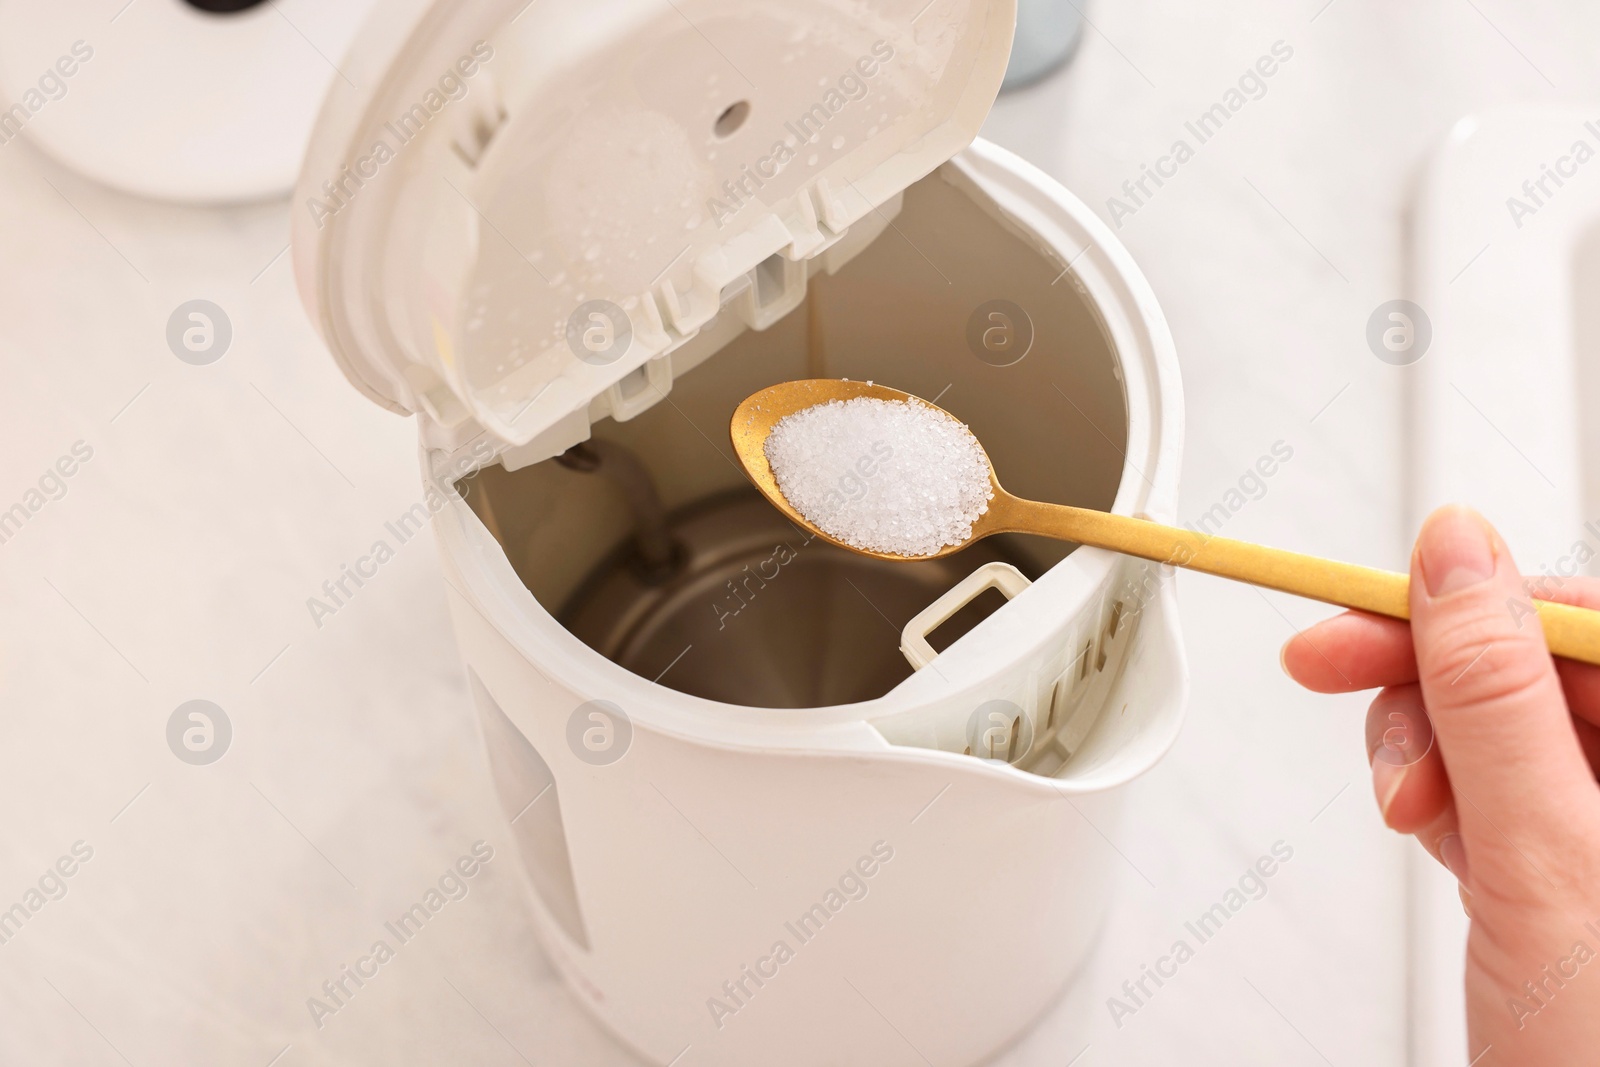 Photo of Cleaning electric kettle. Woman adding baking soda to appliance at table, above view